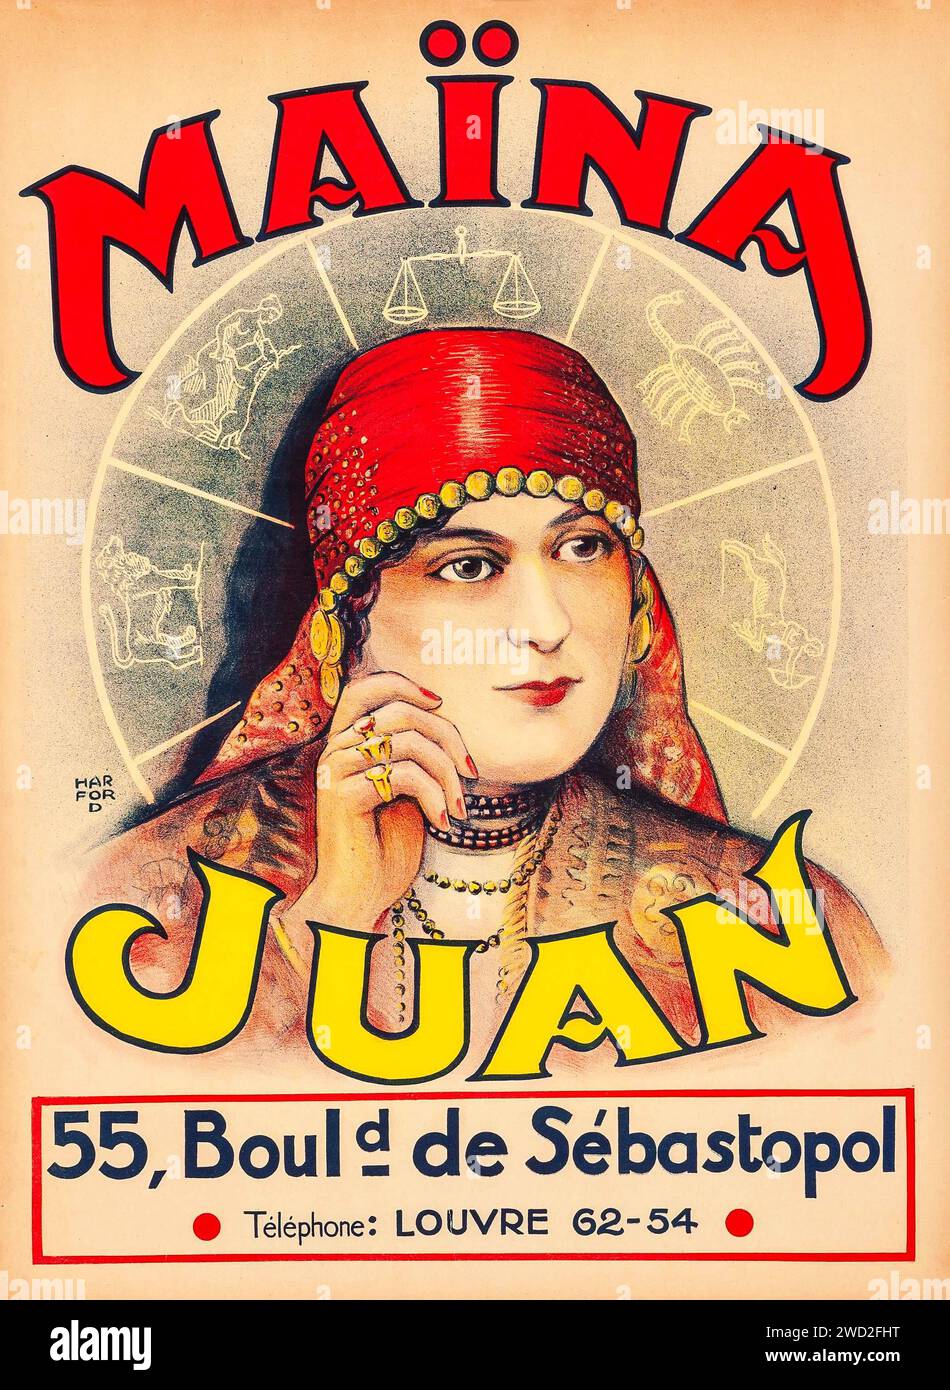 Maïna Juan (1930s) French Advertising Poster - Harford Artwork - Maïna Juan was a famous Parisian psychic of the 20's and 30's -  horoscope background Stock Photo